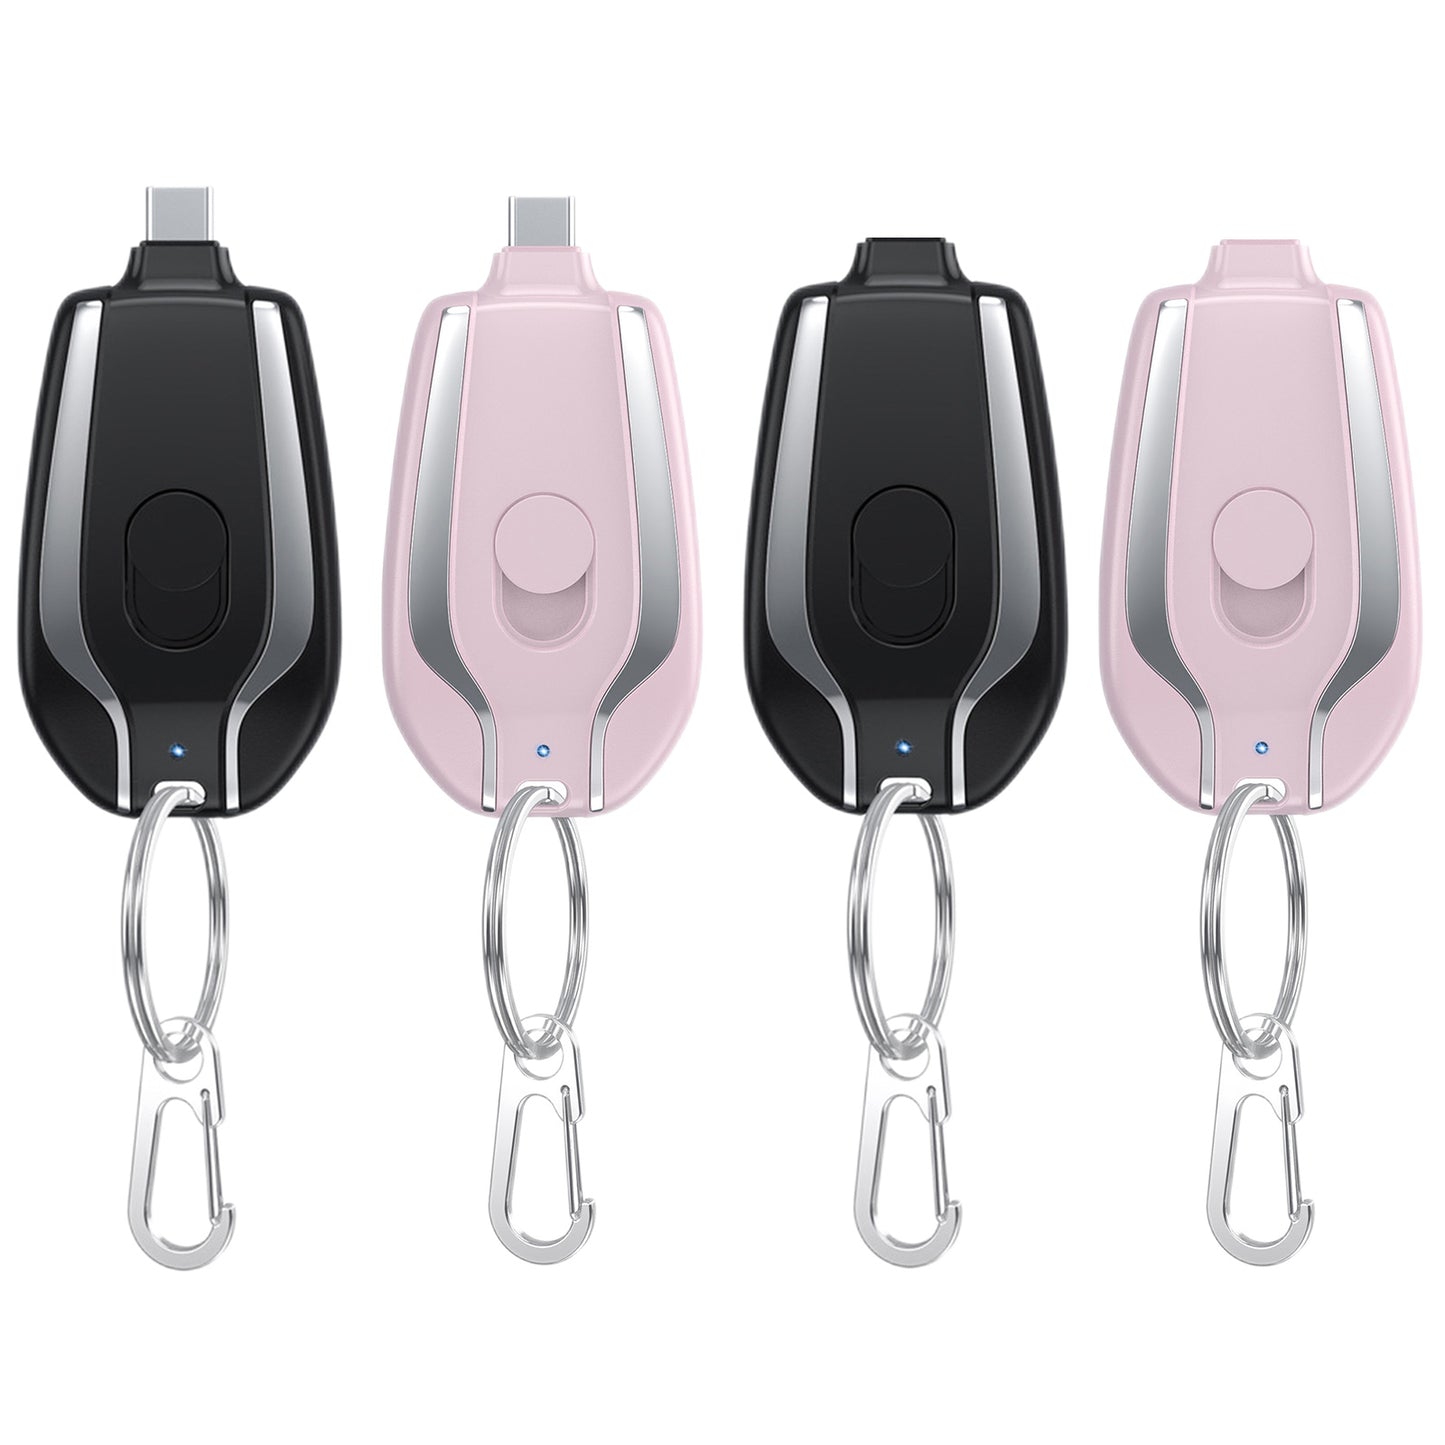 "Portable Emergency Keychain Power Bank for Type-C "